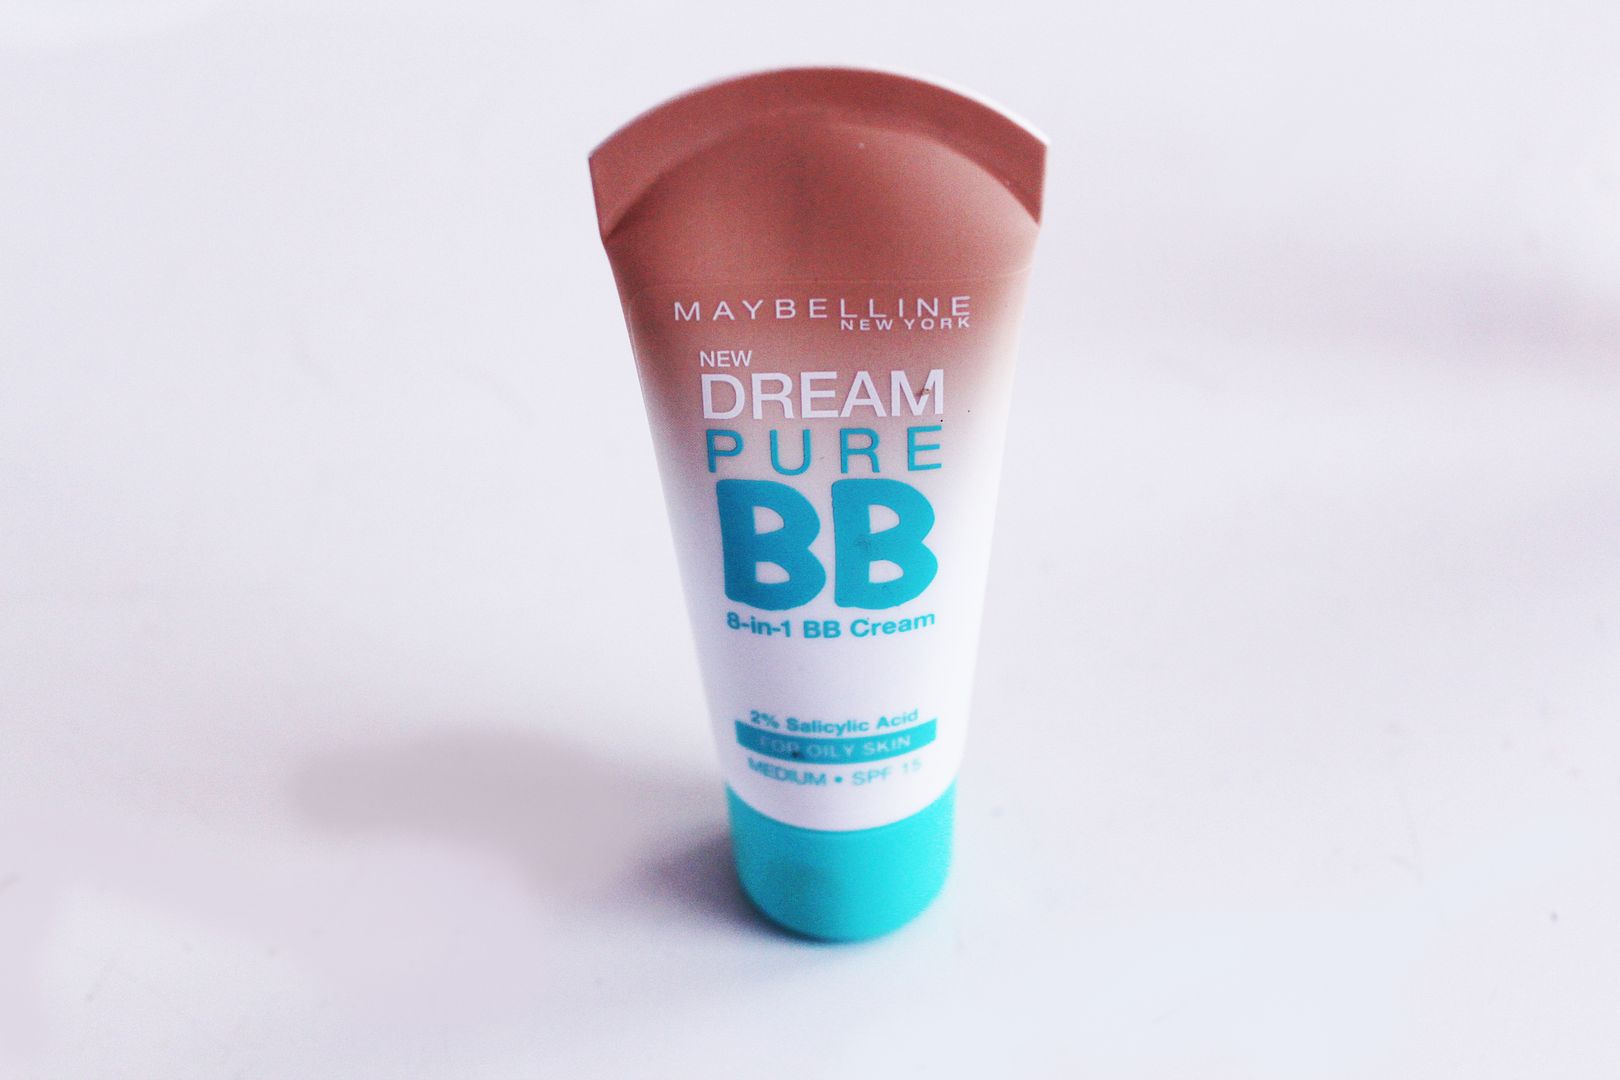  photo maybellinebbcreamreview_zps7a4ae108.jpg